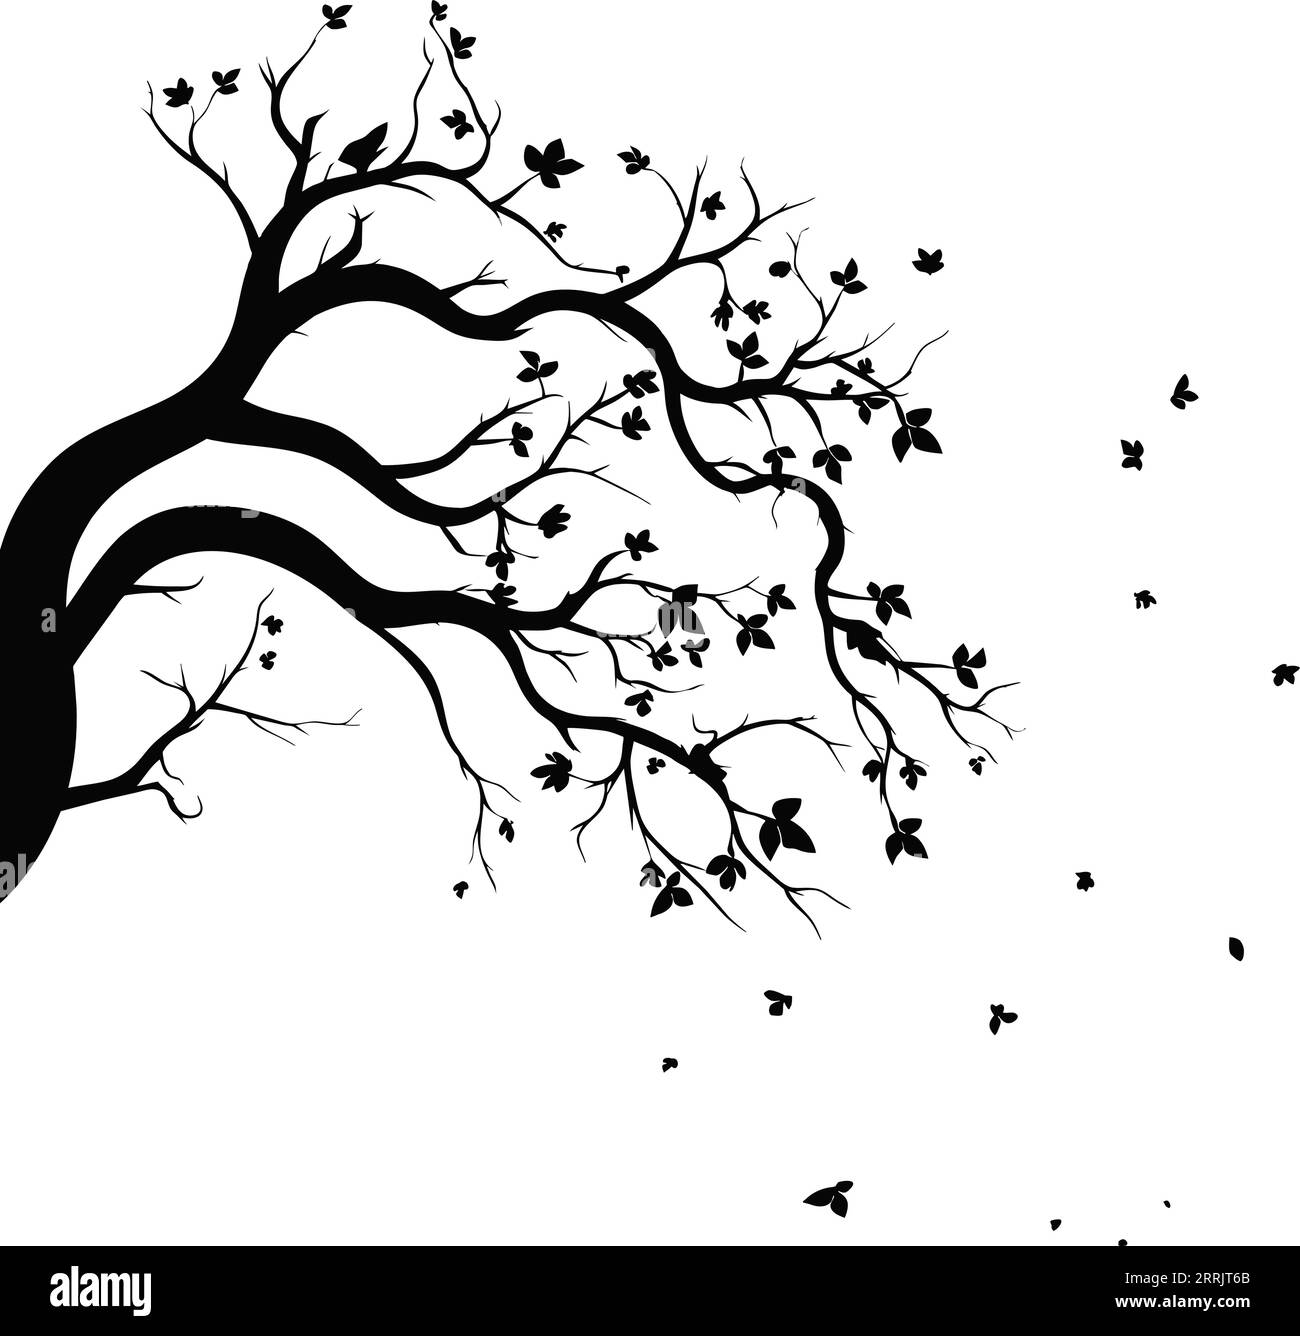 Vector illustration of isolated, realistic tree branch with leaves and ...